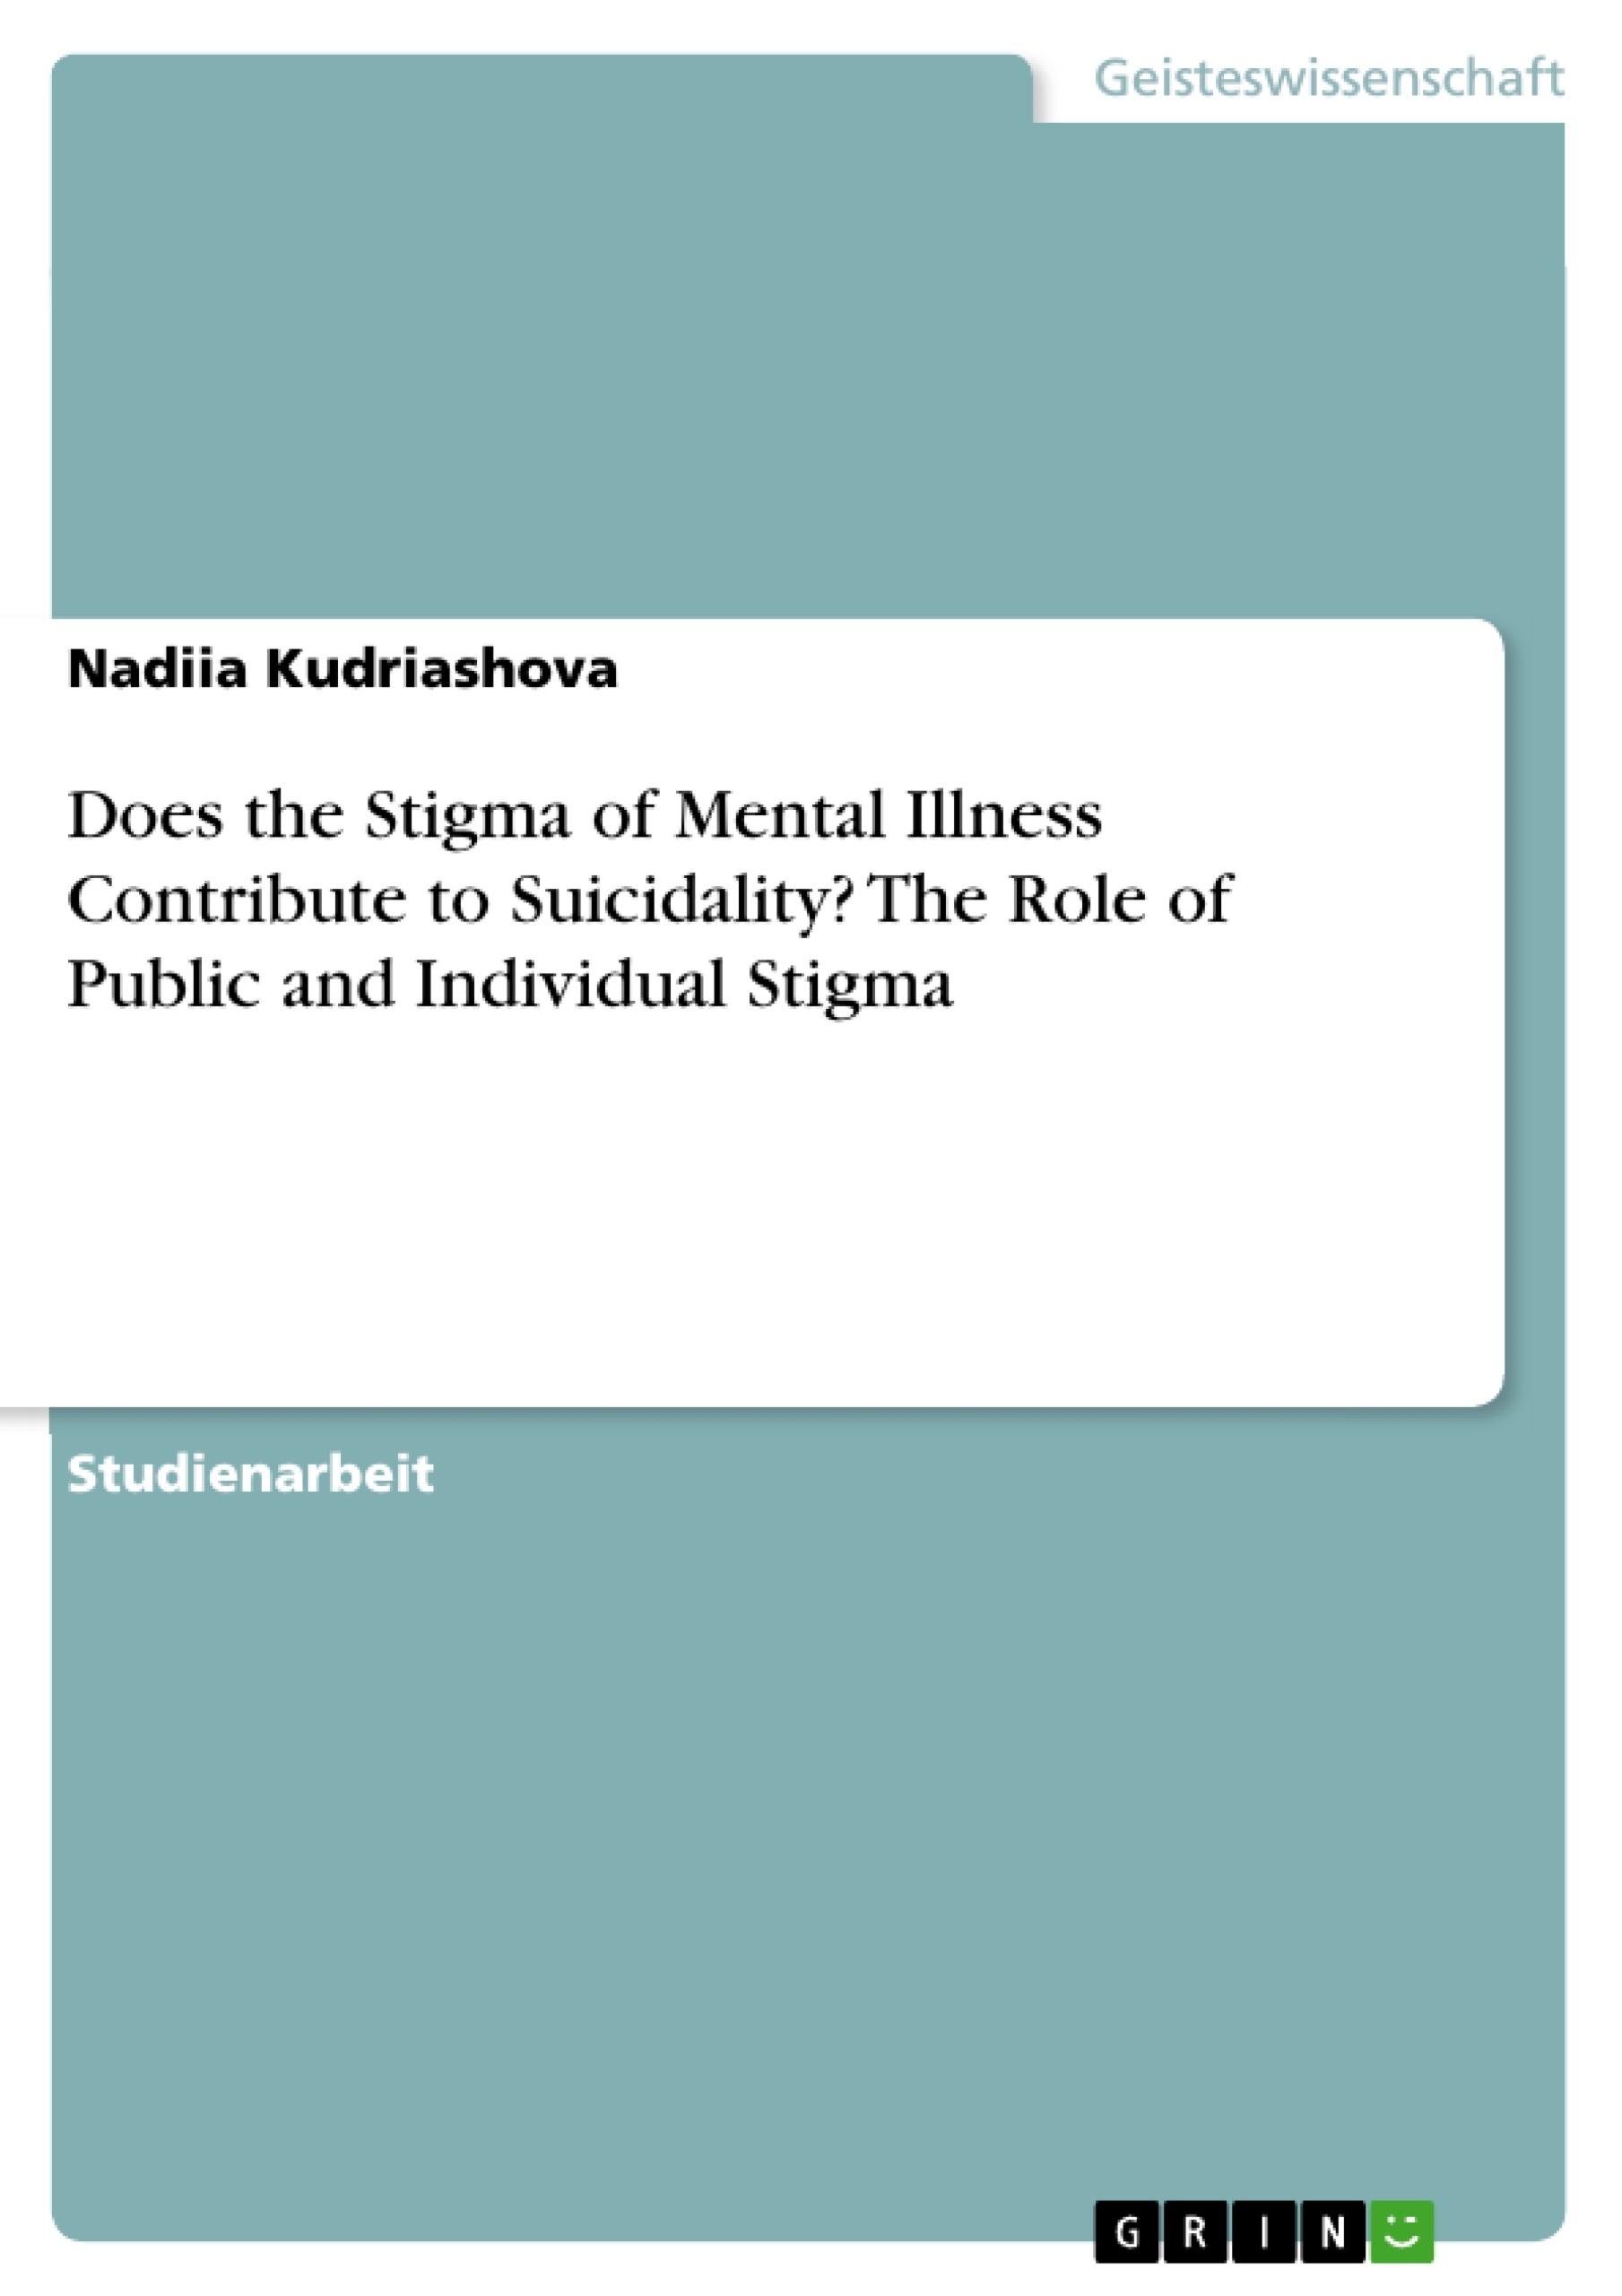 Título: Does the Stigma of Mental Illness Contribute to Suicidality? The Role of Public and Individual Stigma